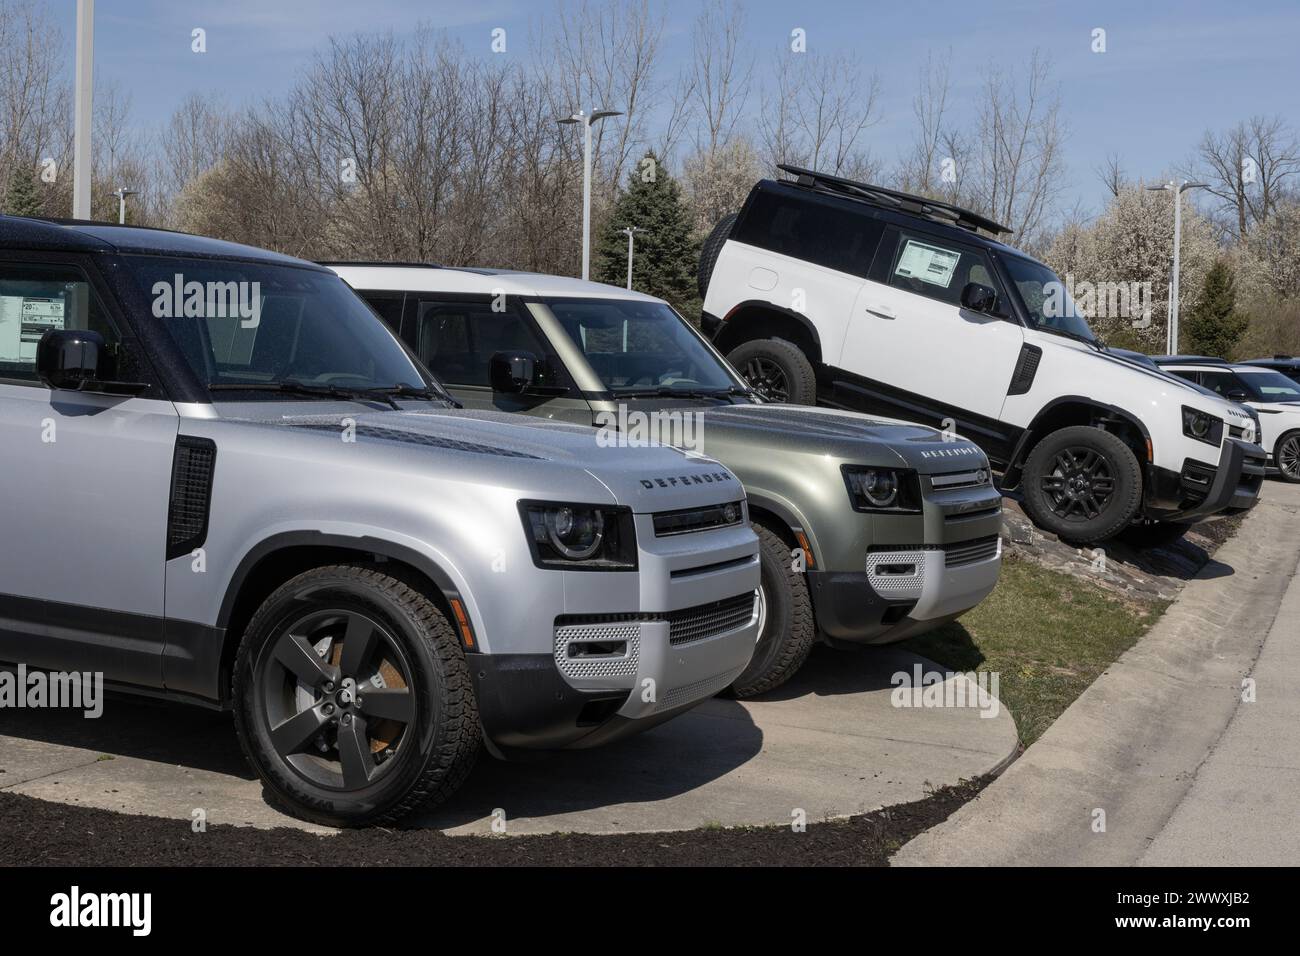 Indianapolis - March 24, 2024: Land Rover Defender display at a dealership. Land Rover offers the Defender in 90, 110 and 130 models. Stock Photo